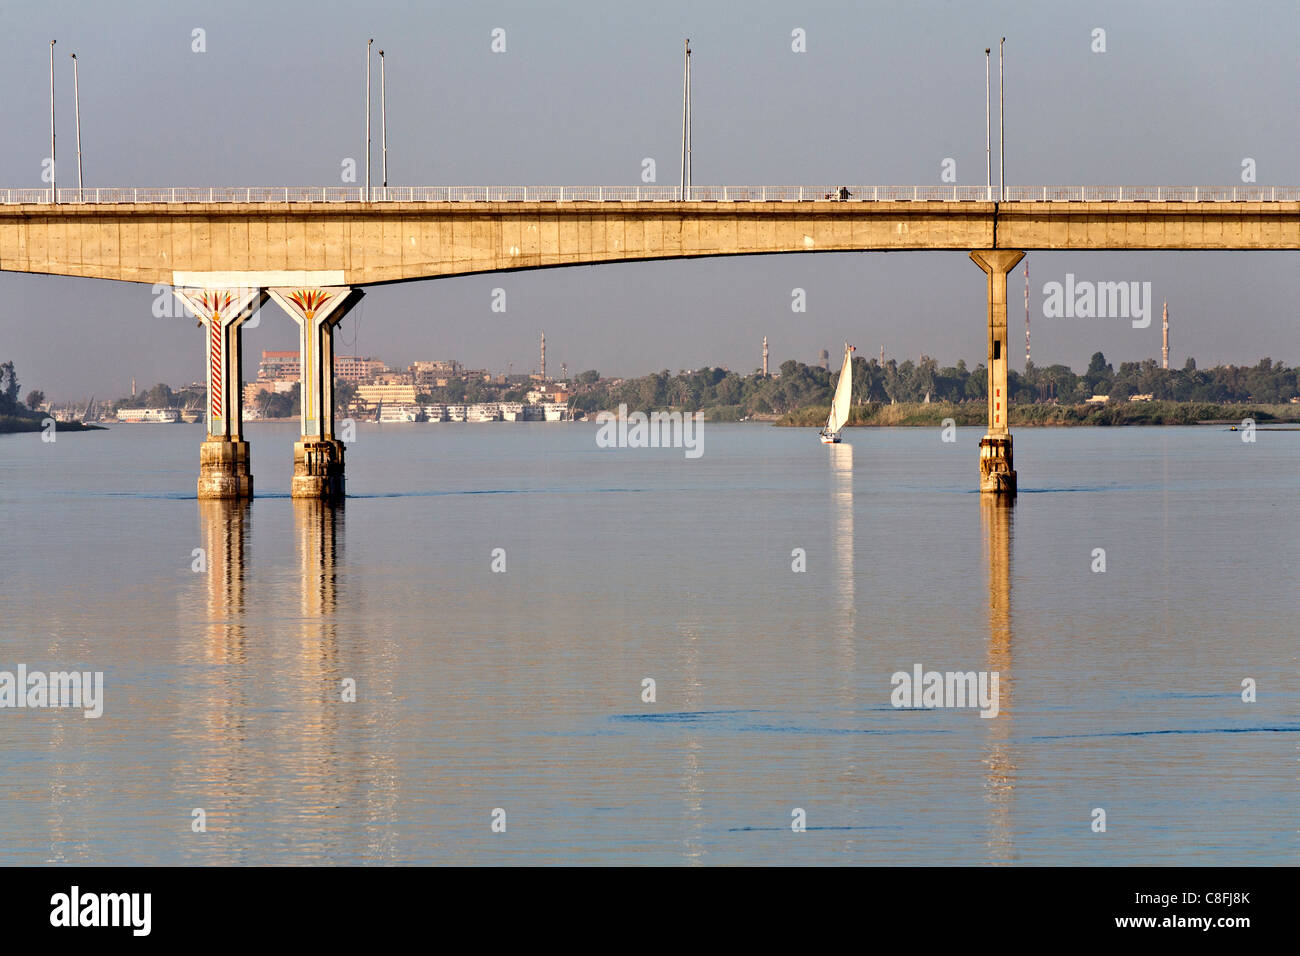 Section of Luxor bridge seen from the middle of the Nile reflected in calm water, with felucca in distance Luxor, Egypt, Africa Stock Photo